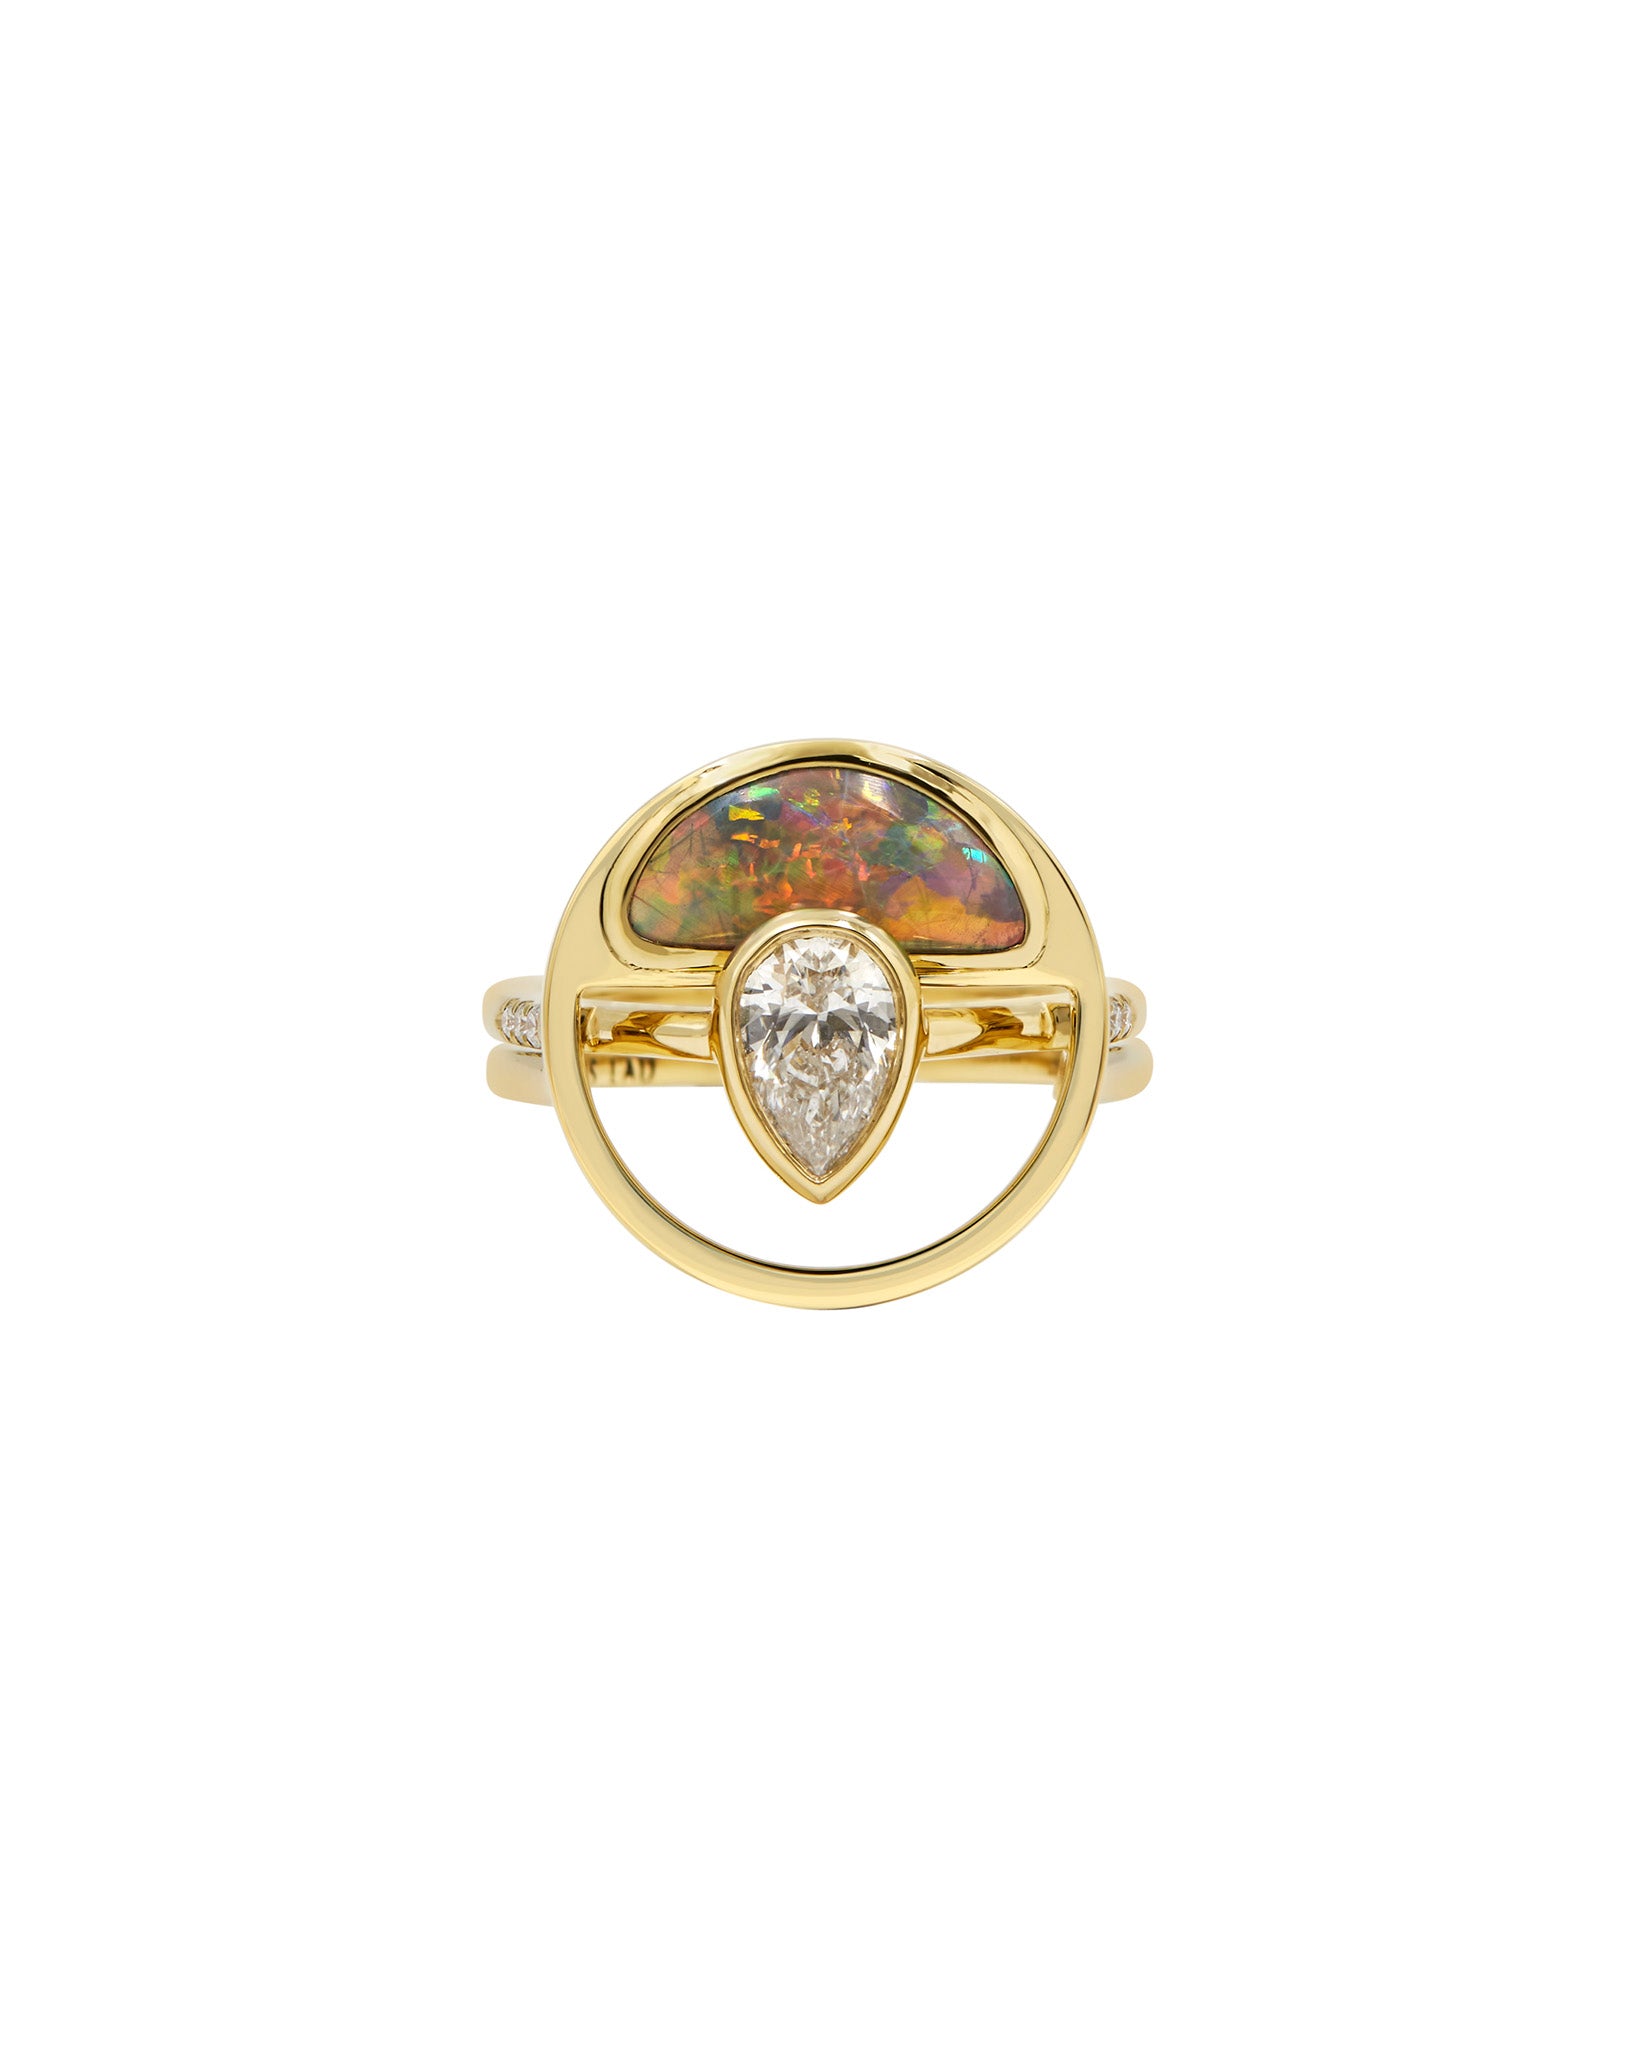 Bliss Lau winged acoustic ring and aura ring set with heritage opal and white diamond in a bezel setting. 